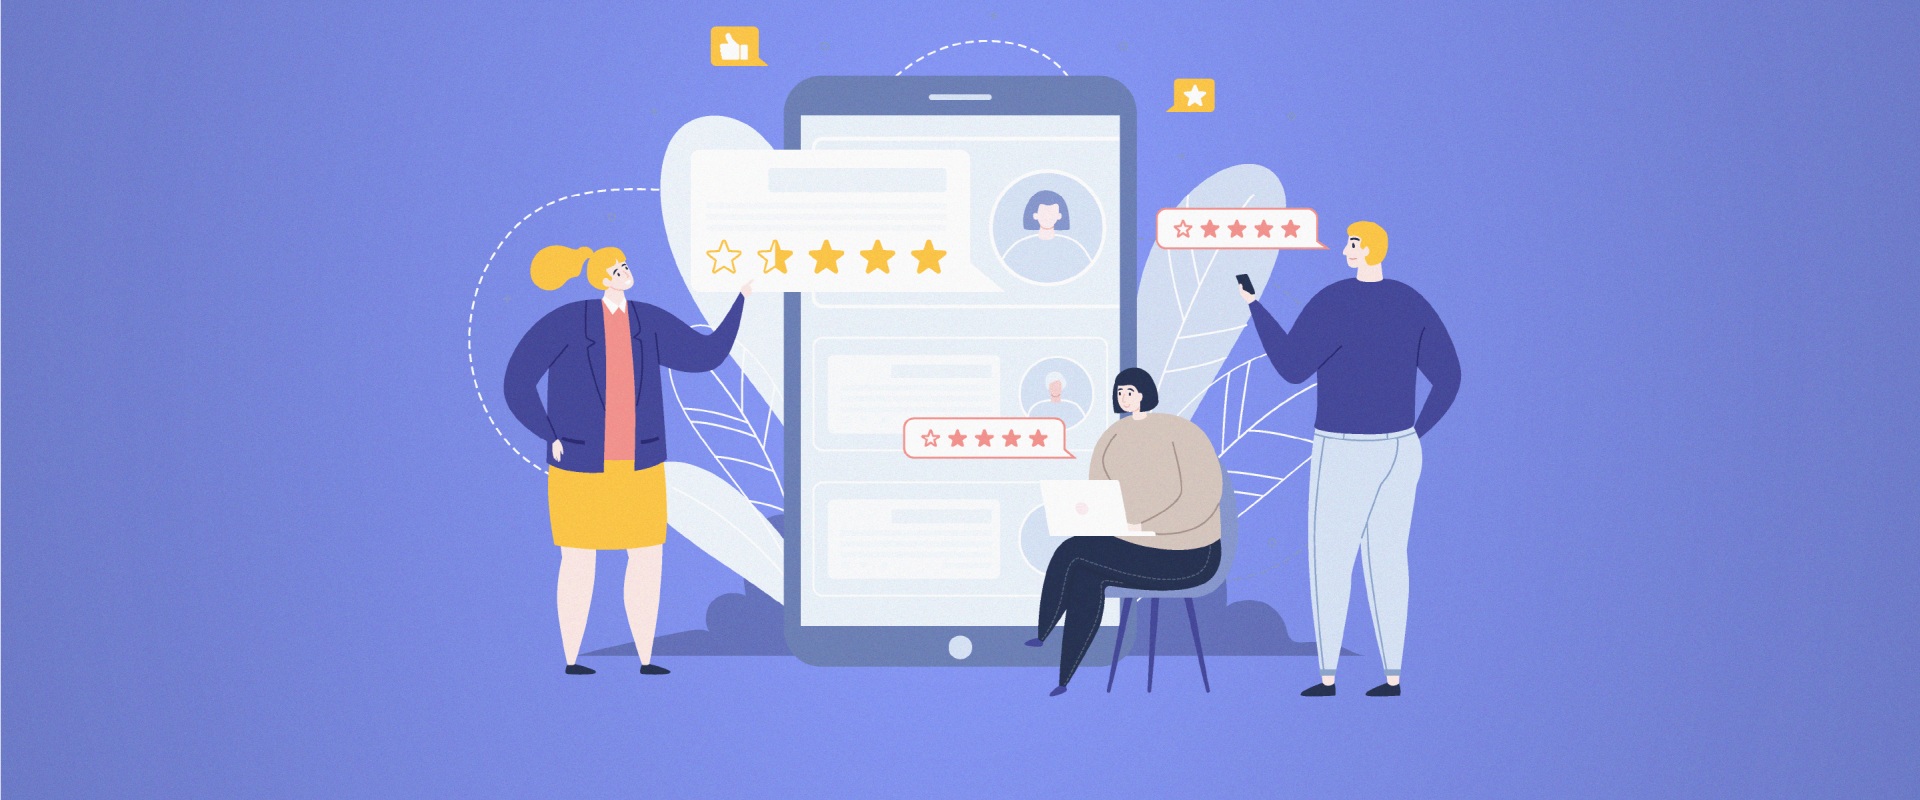 Dashboard Tools for Managing Online Reviews and Comments